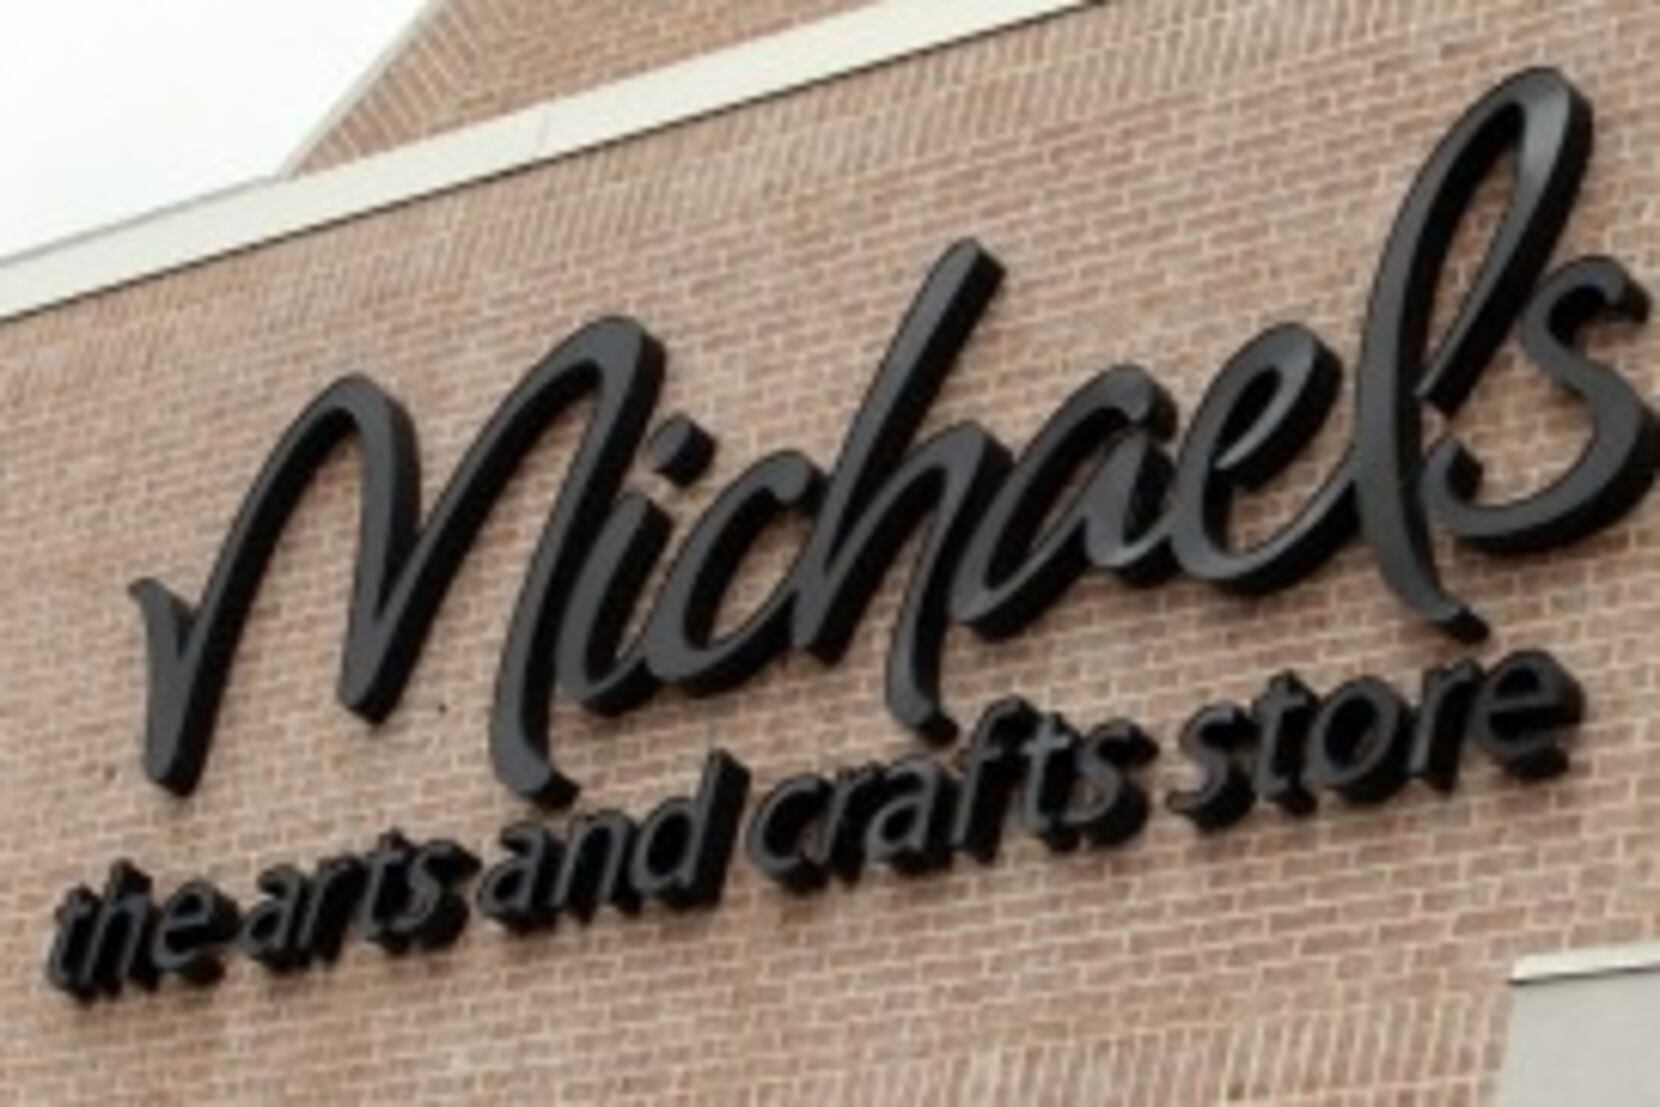 Michaels: The Arts & Crafts Retailer Struggling to Stay Afloat